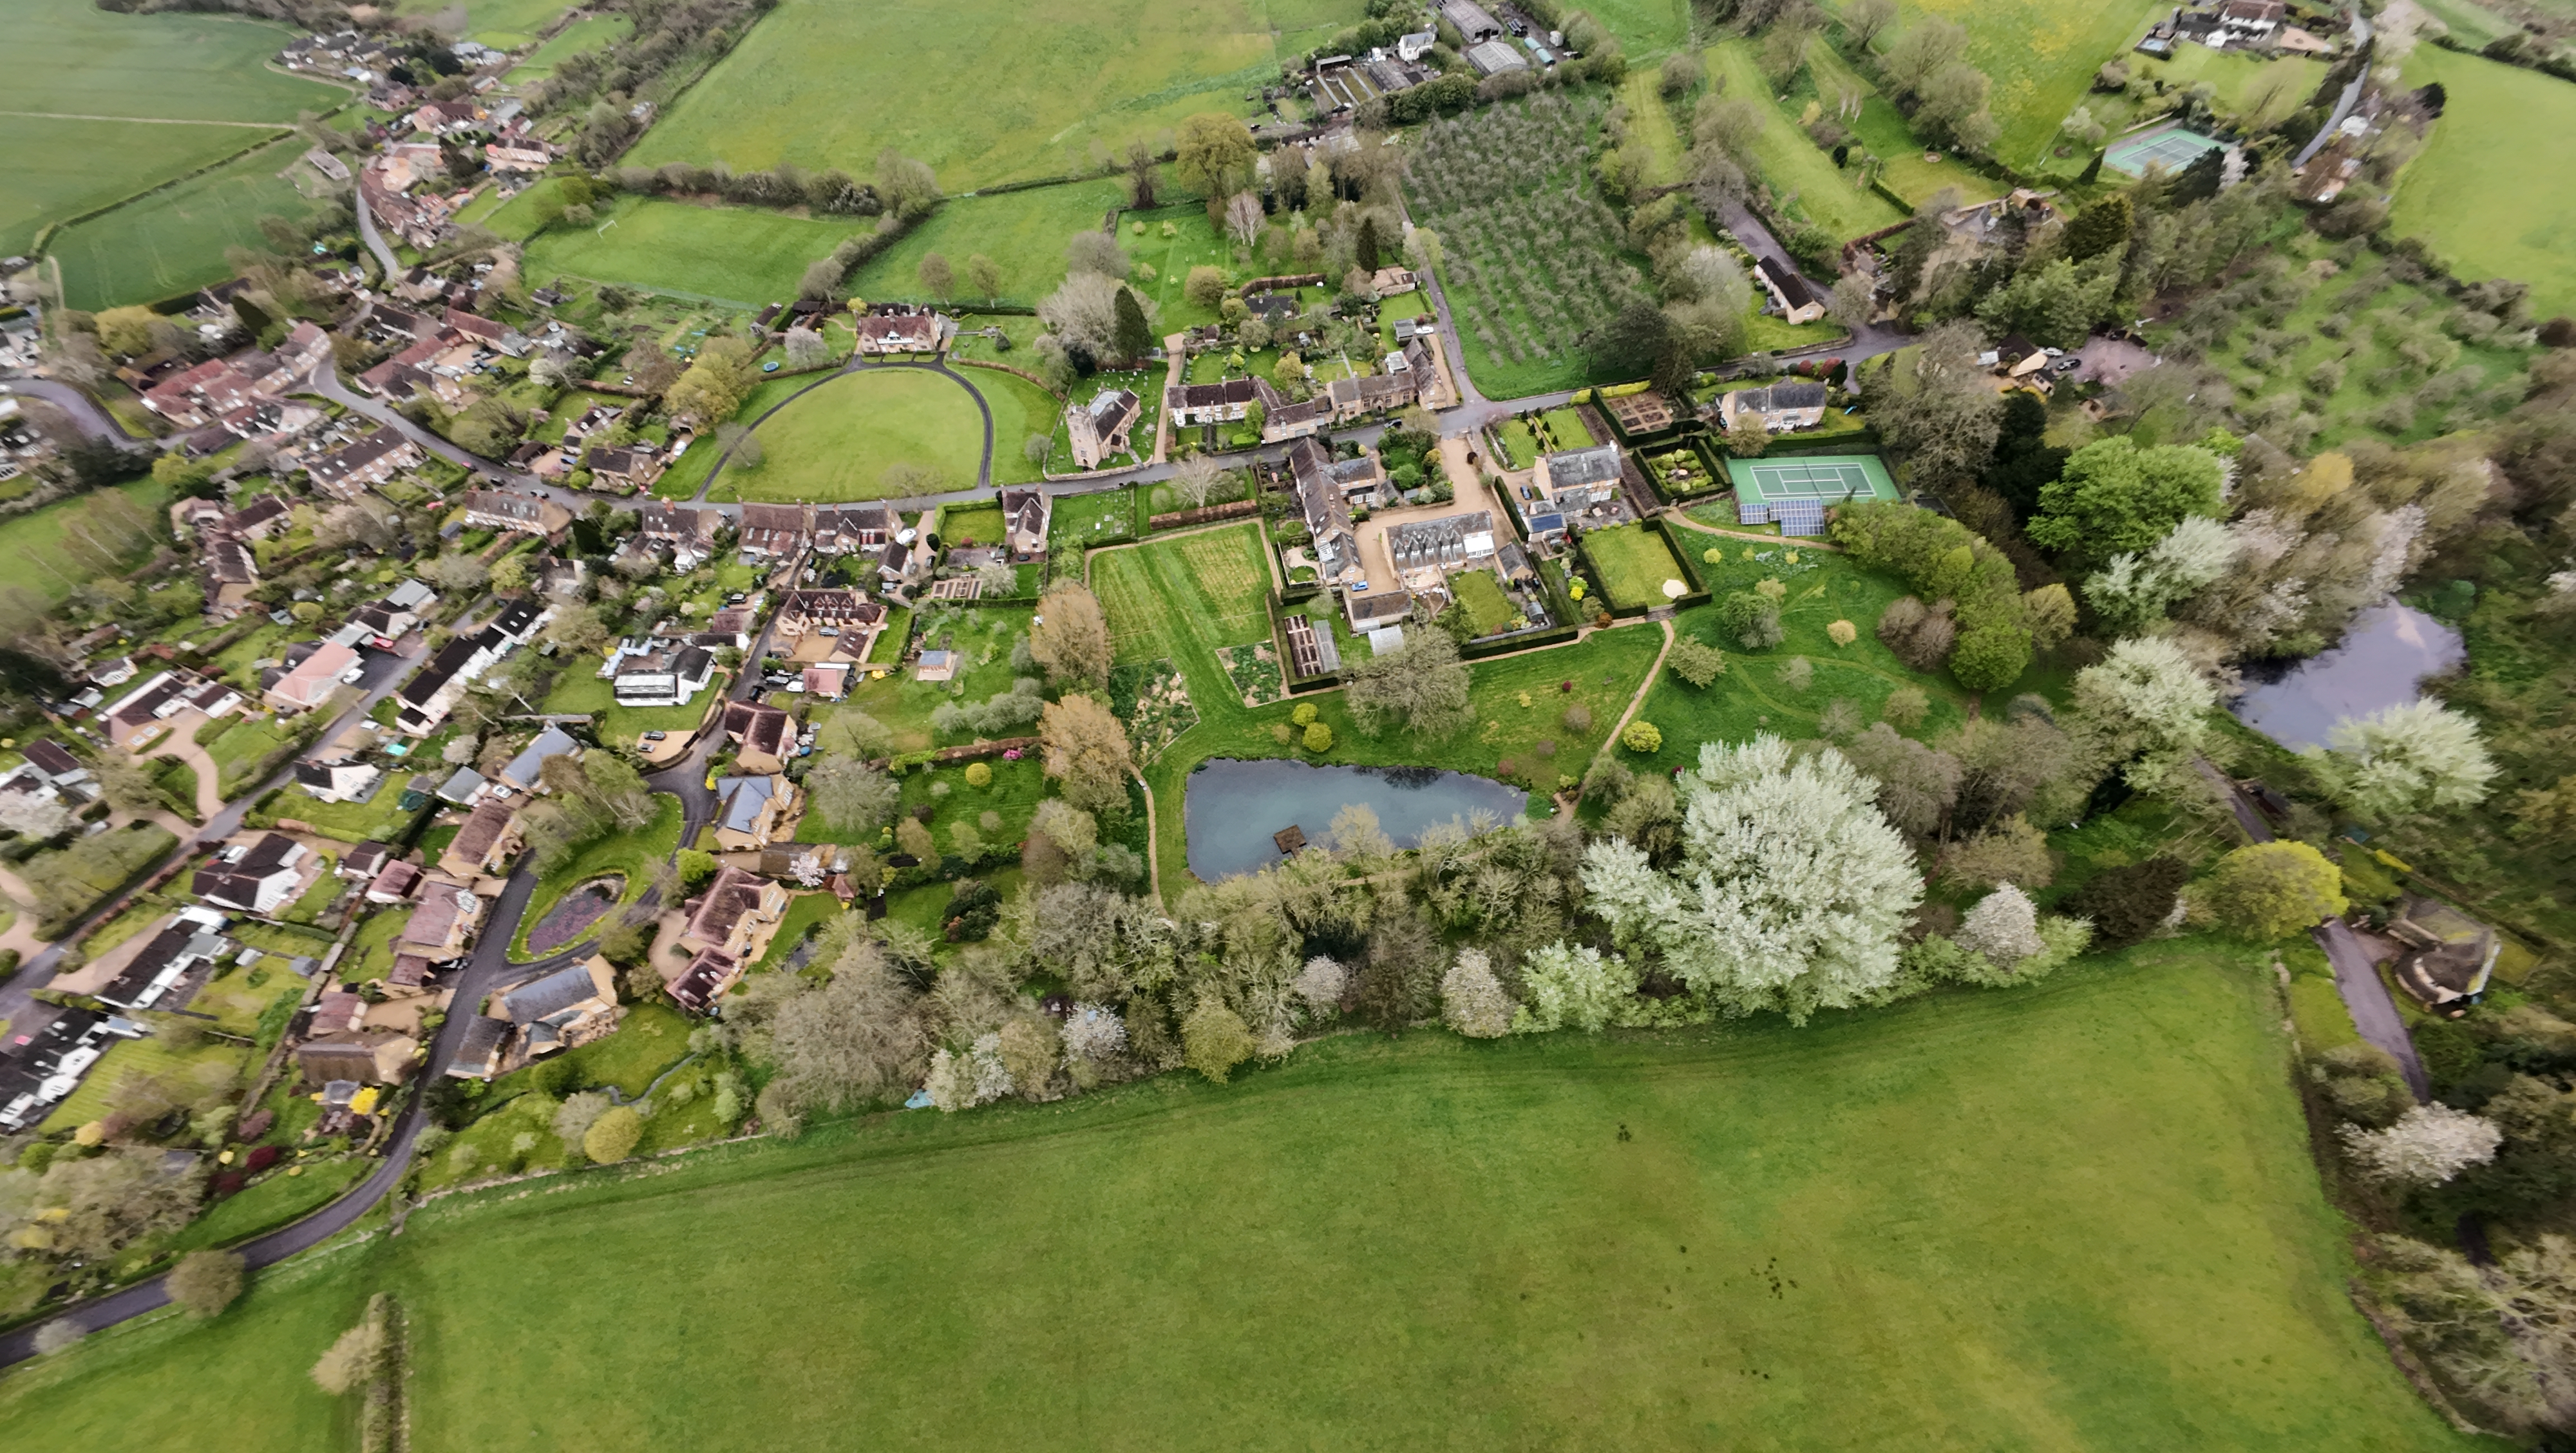 Aerial images of rural UK village and fields on an overcast day taken with the DJI Avata 2